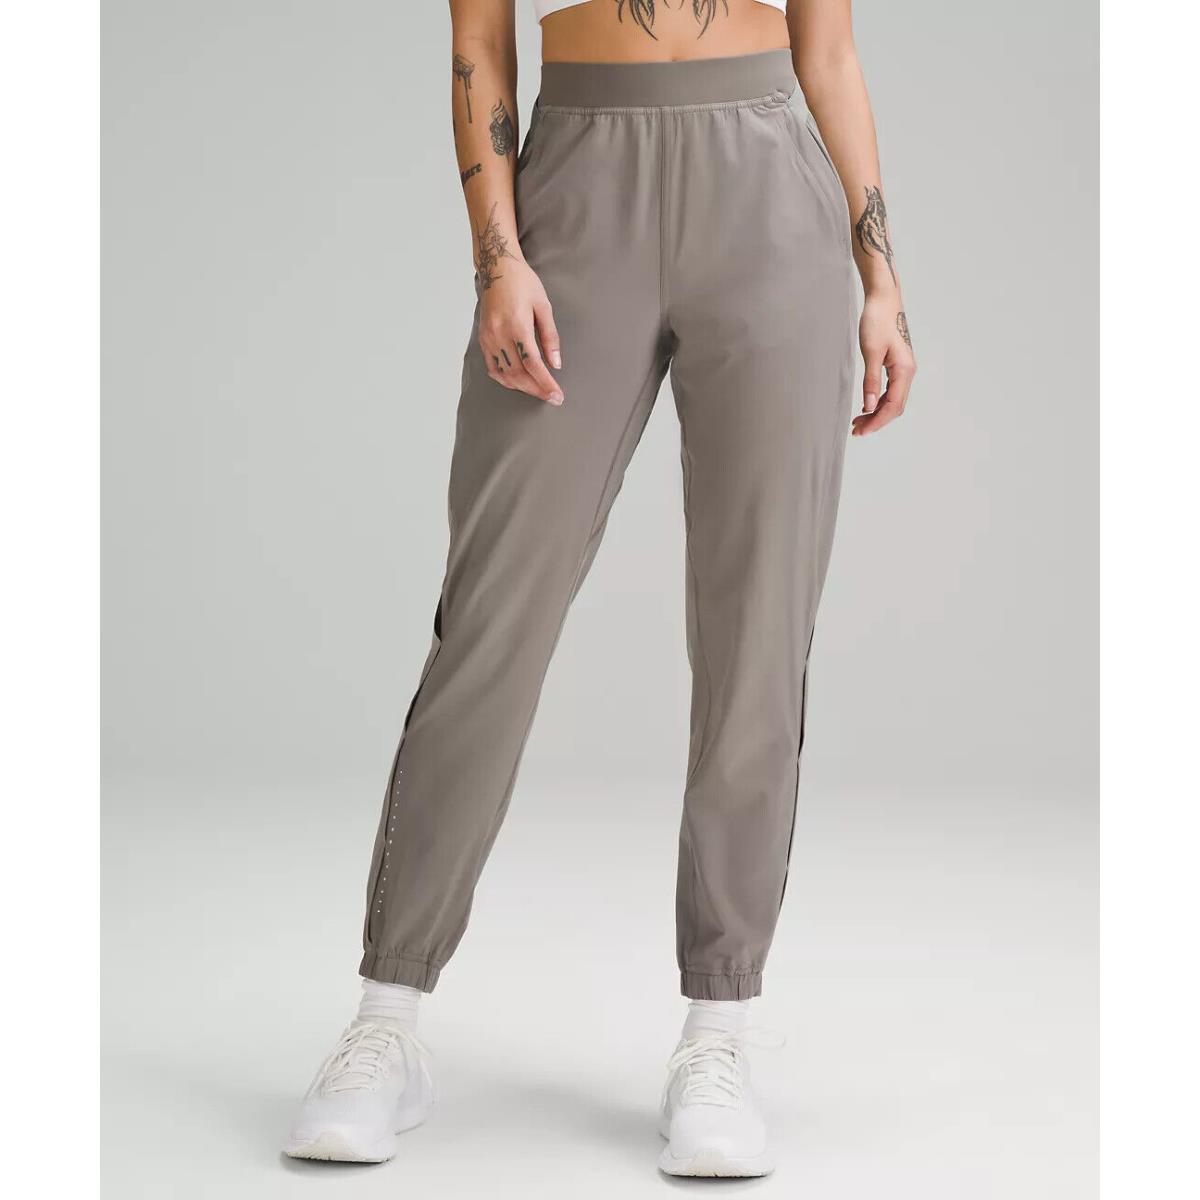 Lululemon Adapted State High Rise Jogger Airflow - Retail Carbon Dust